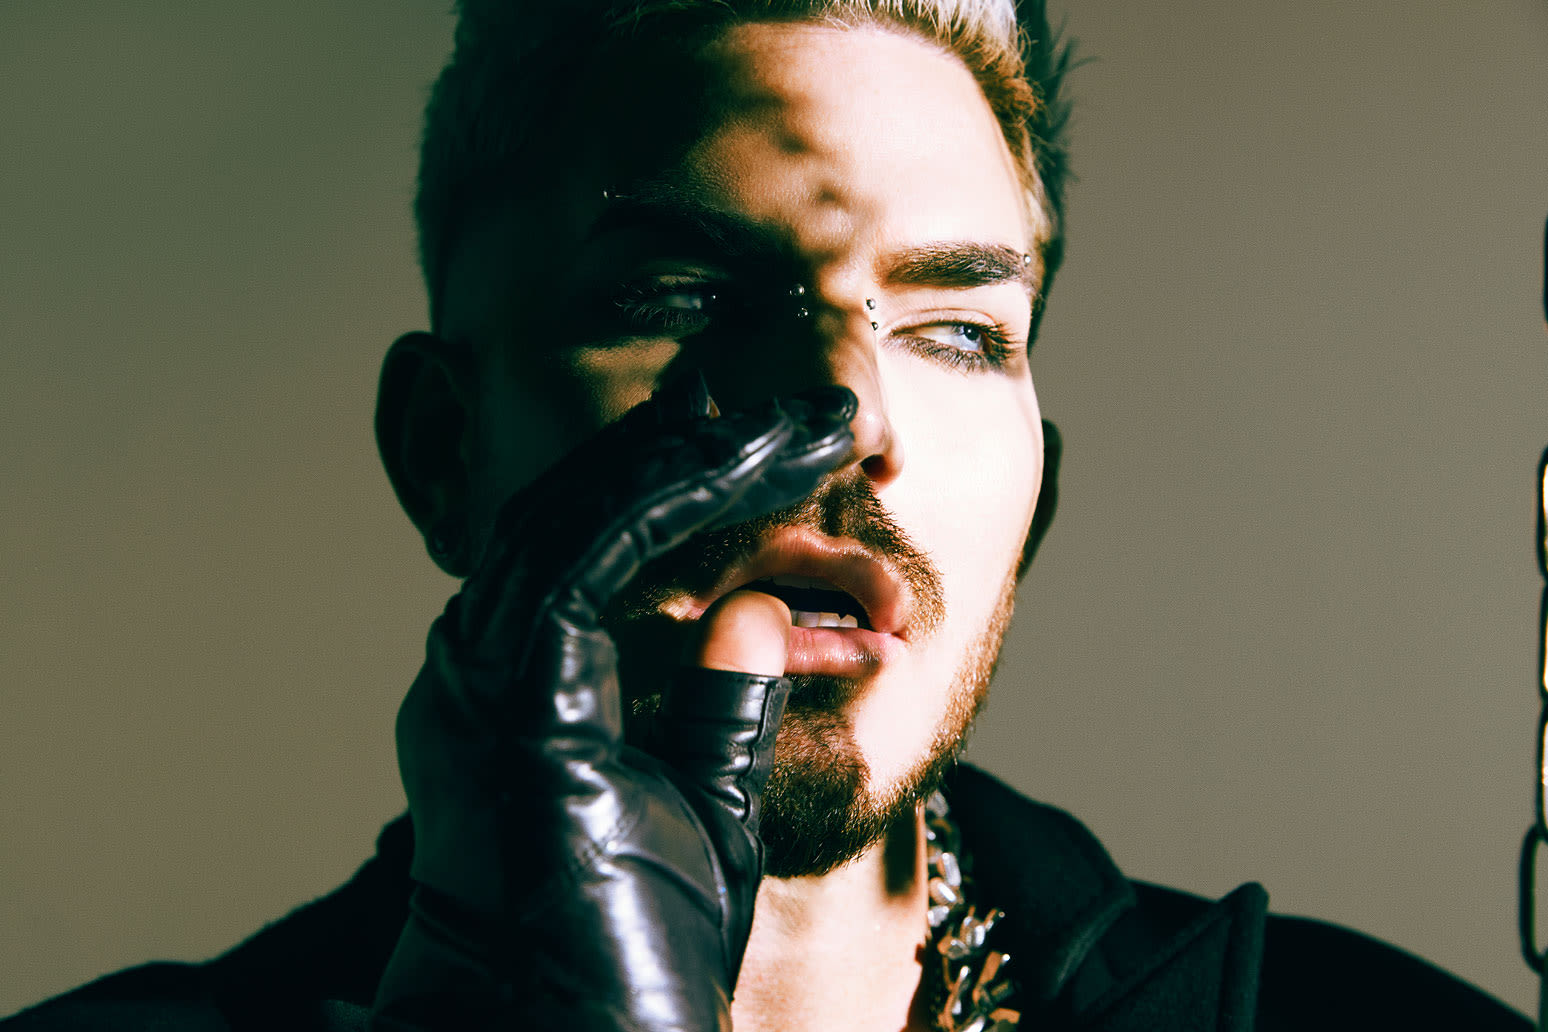 Adam Lambert Played the Industry Game — Now He’s Rewriting the Rules With New EP: ‘It’s My Turn’